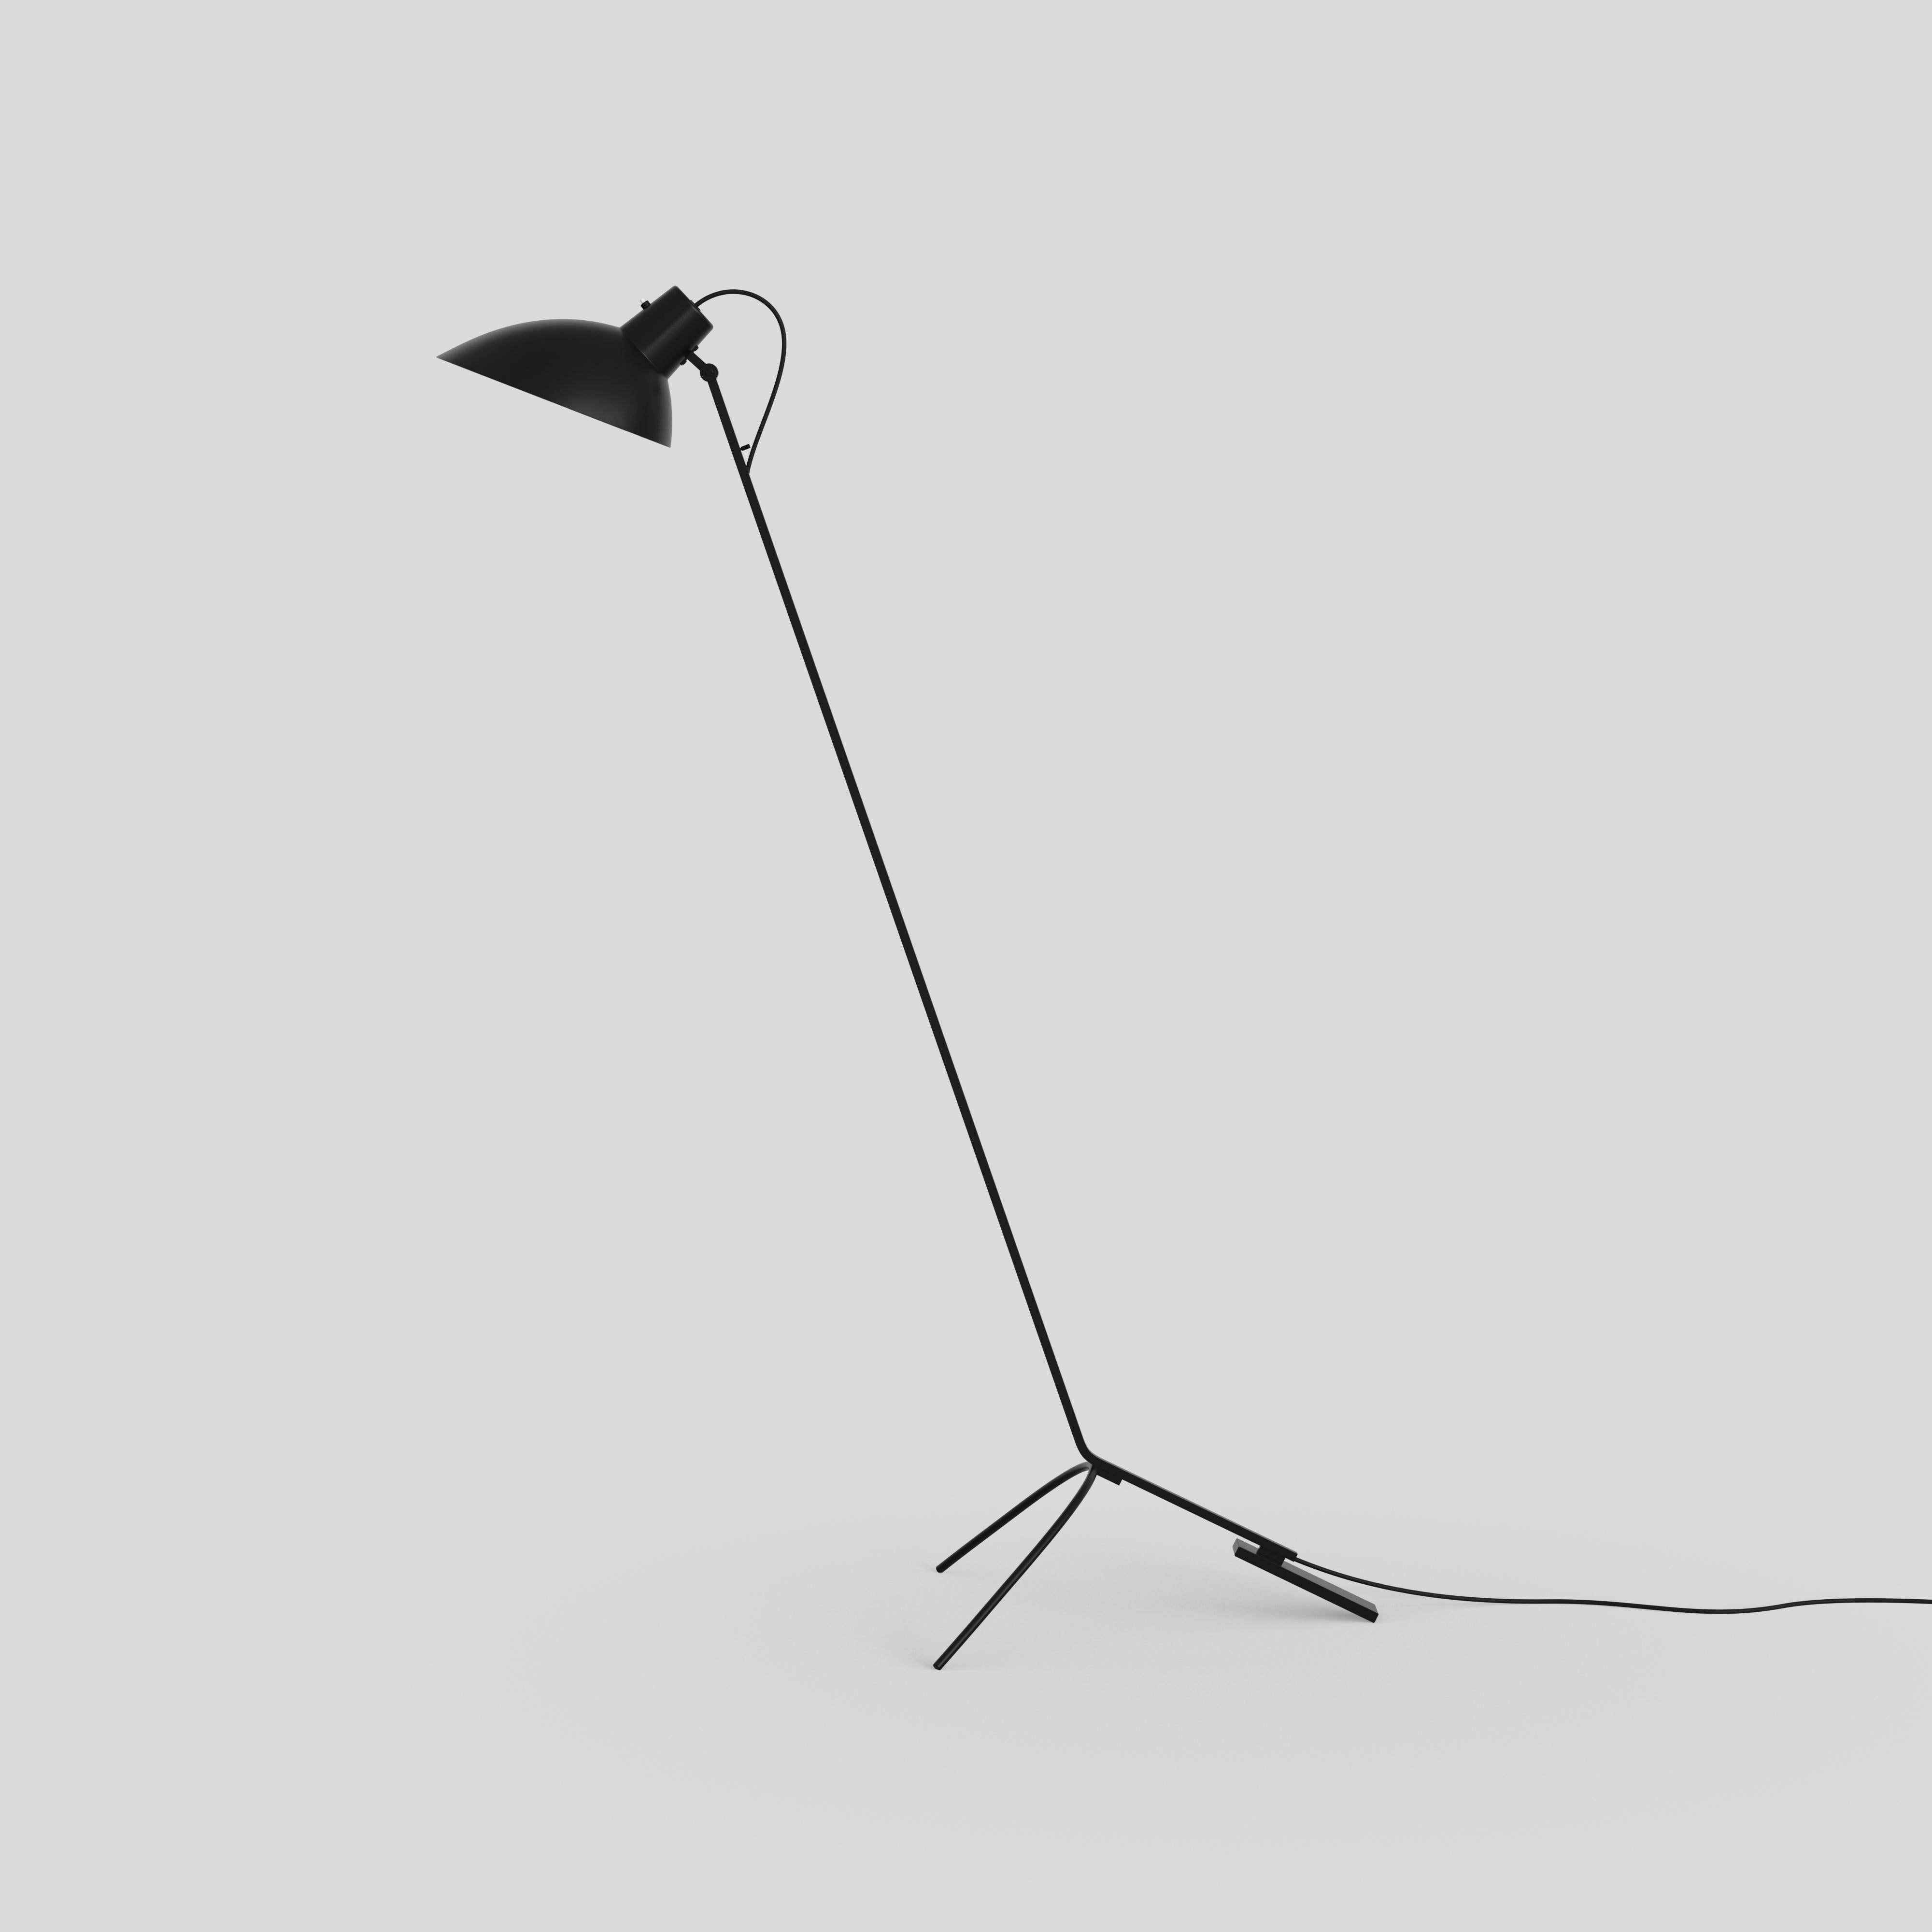 VV Cinquanta floor lamp
Design by Vittoriano Viganò
This version is with black lacquered reflector and black frame.

The VV Cinquanta features an elegant and versatile posable direct light source that can swivel and tilt, from direct working